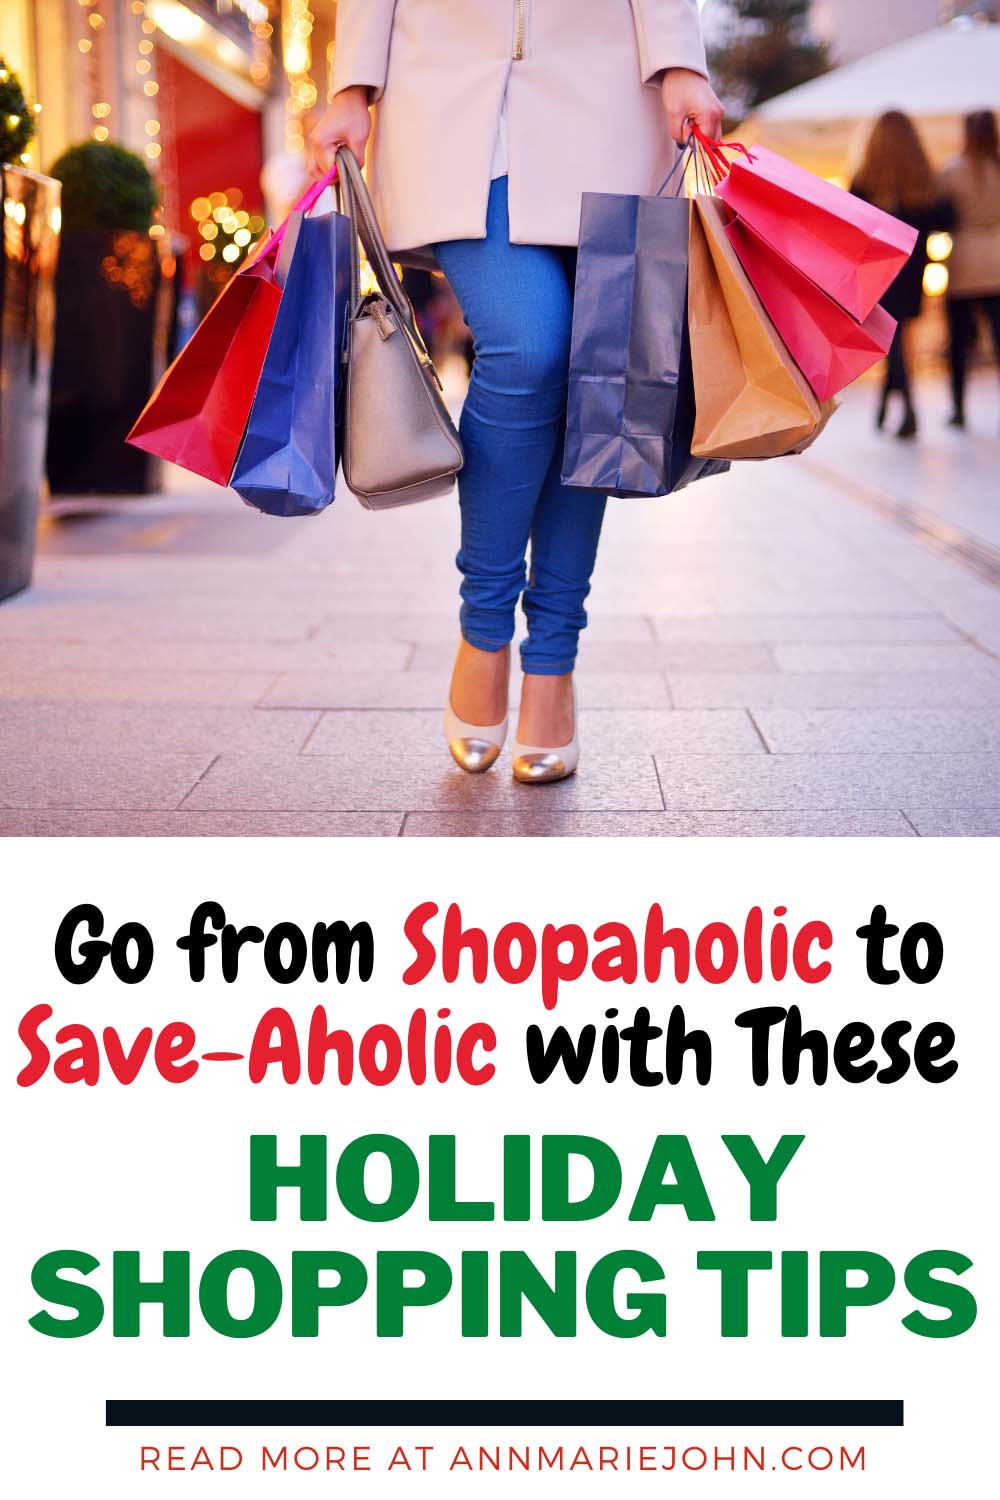 Go from Shopaholic to Save-Aholic with These Holiday Shopping Tips